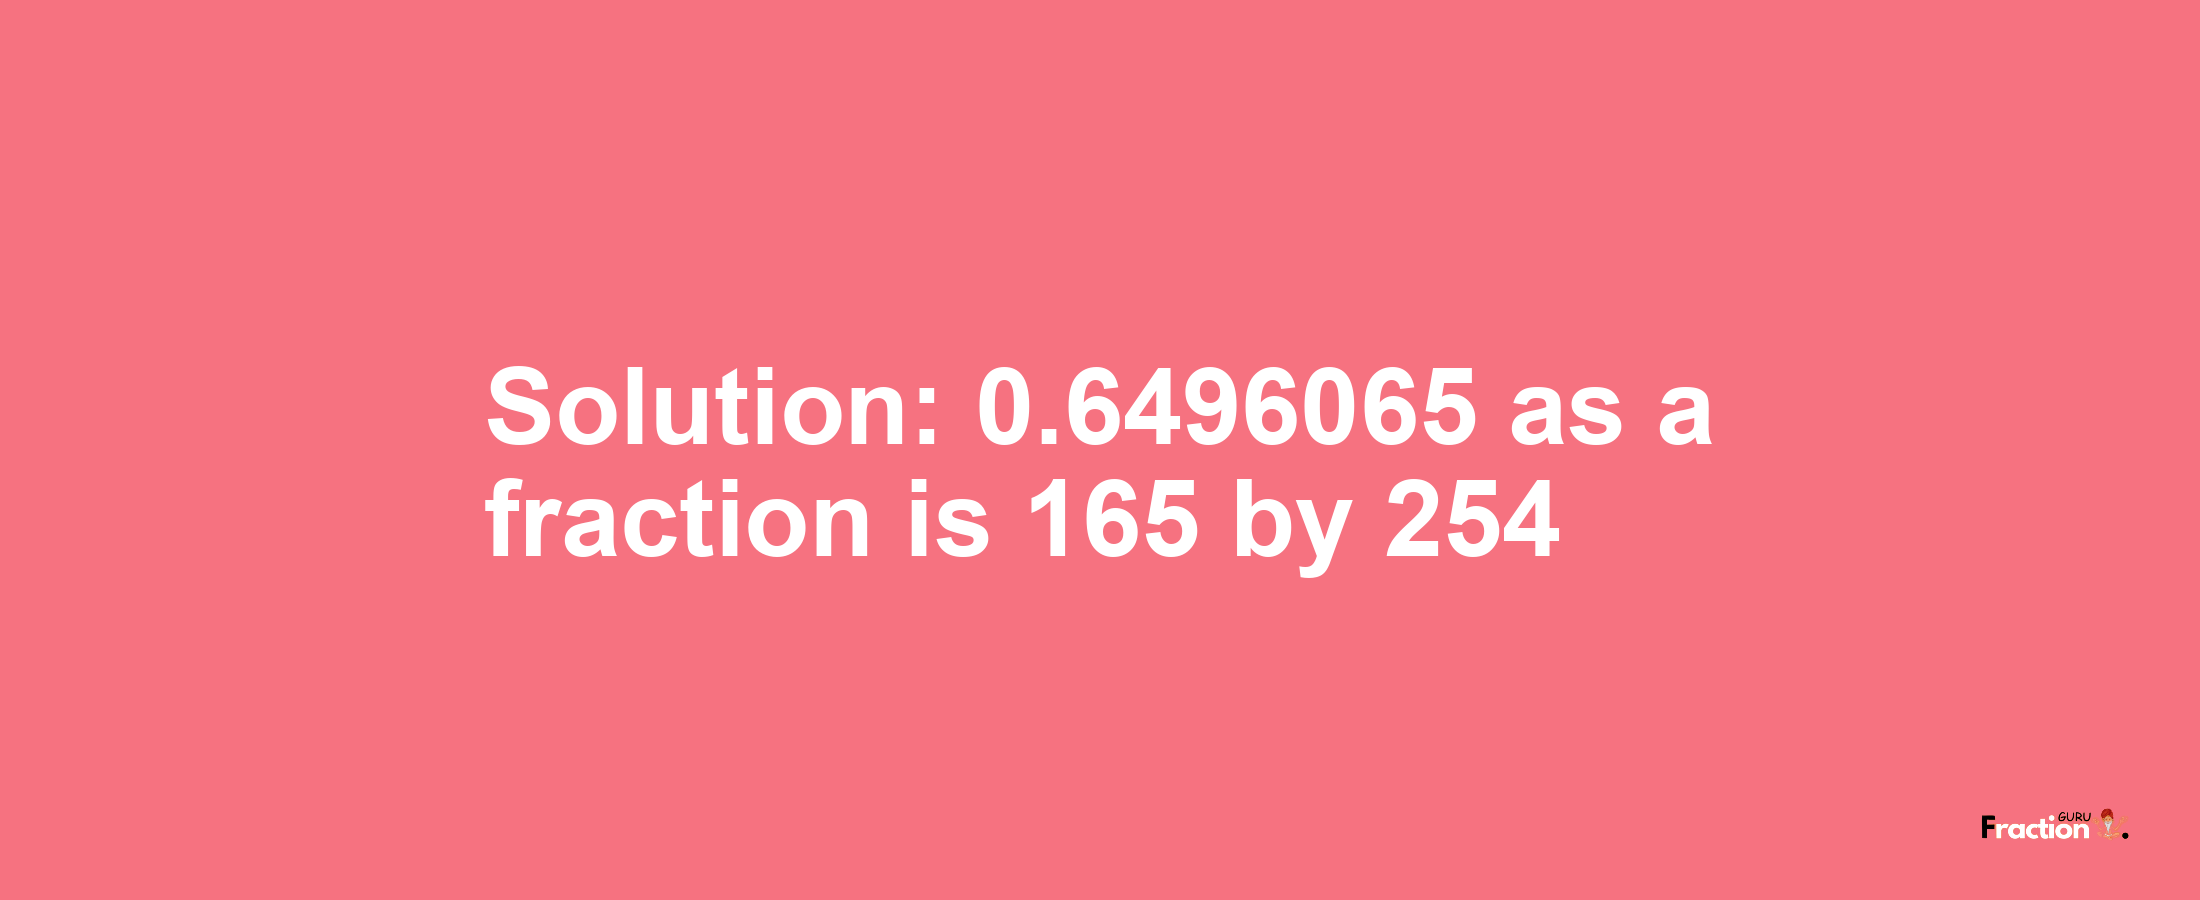 Solution:0.6496065 as a fraction is 165/254